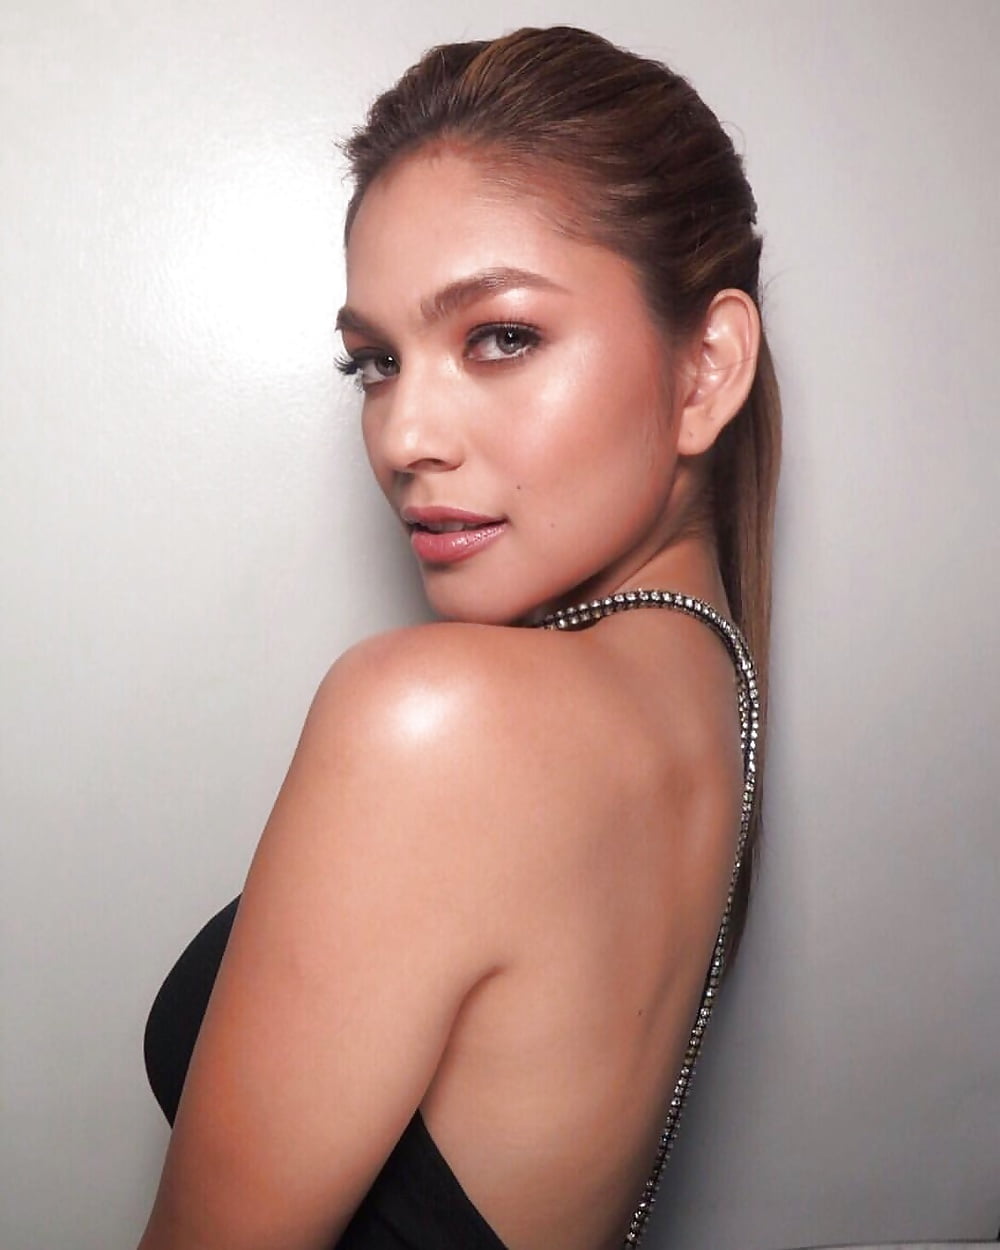 See and Save As andrea torres porn pict - 4crot.com